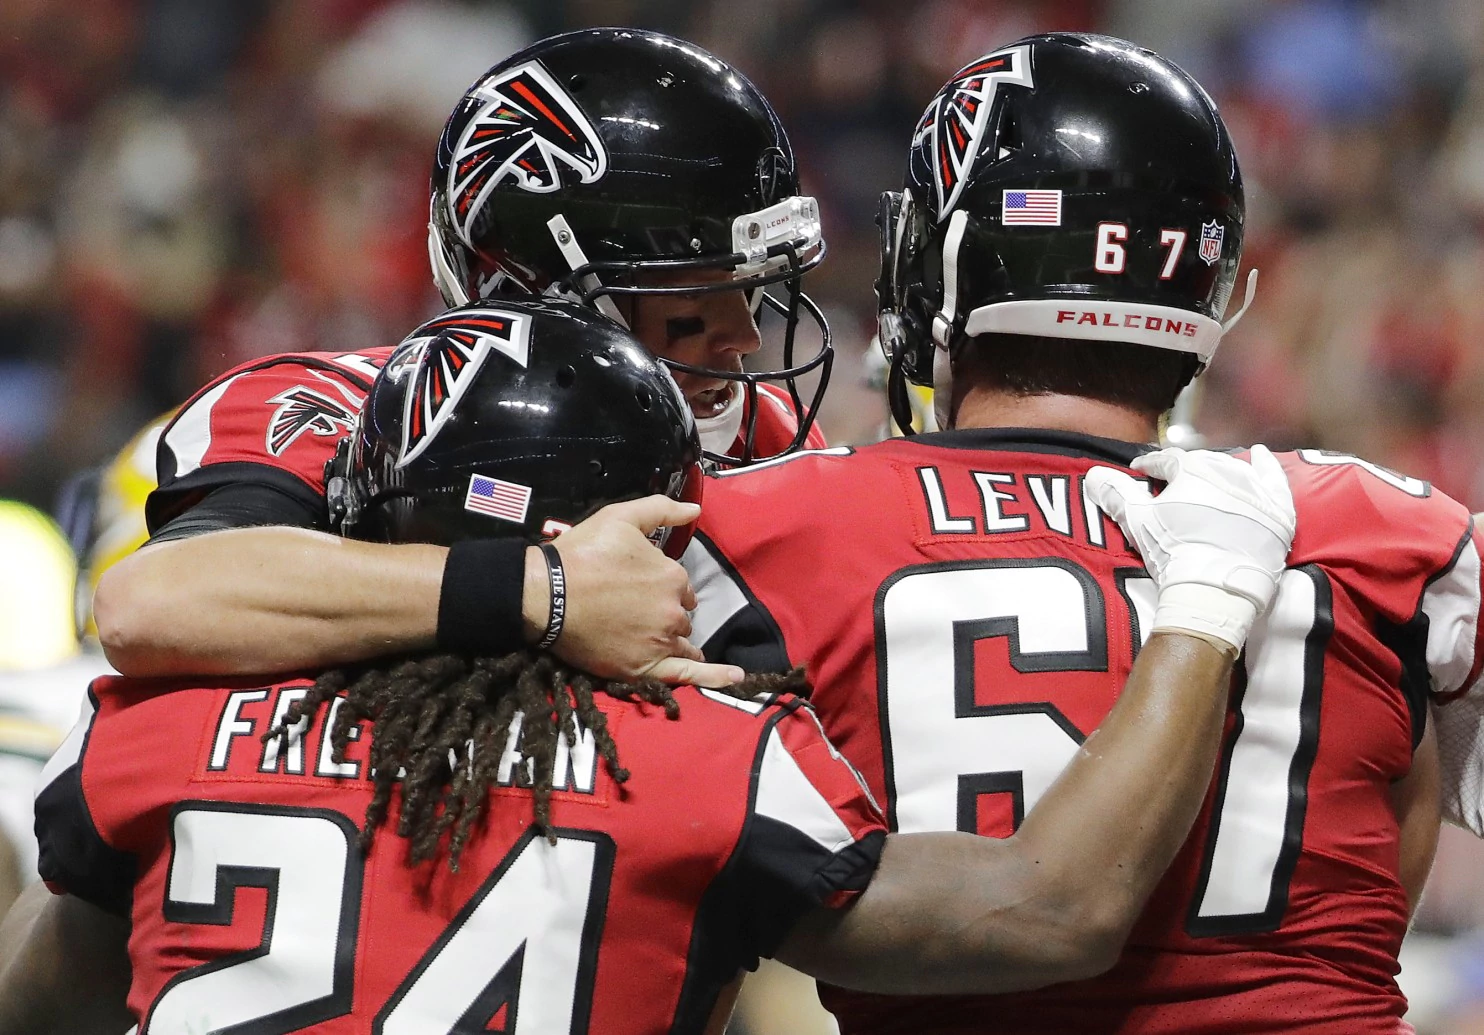 The Latest: Falcons’ Beasley hurts hamstring against Packers